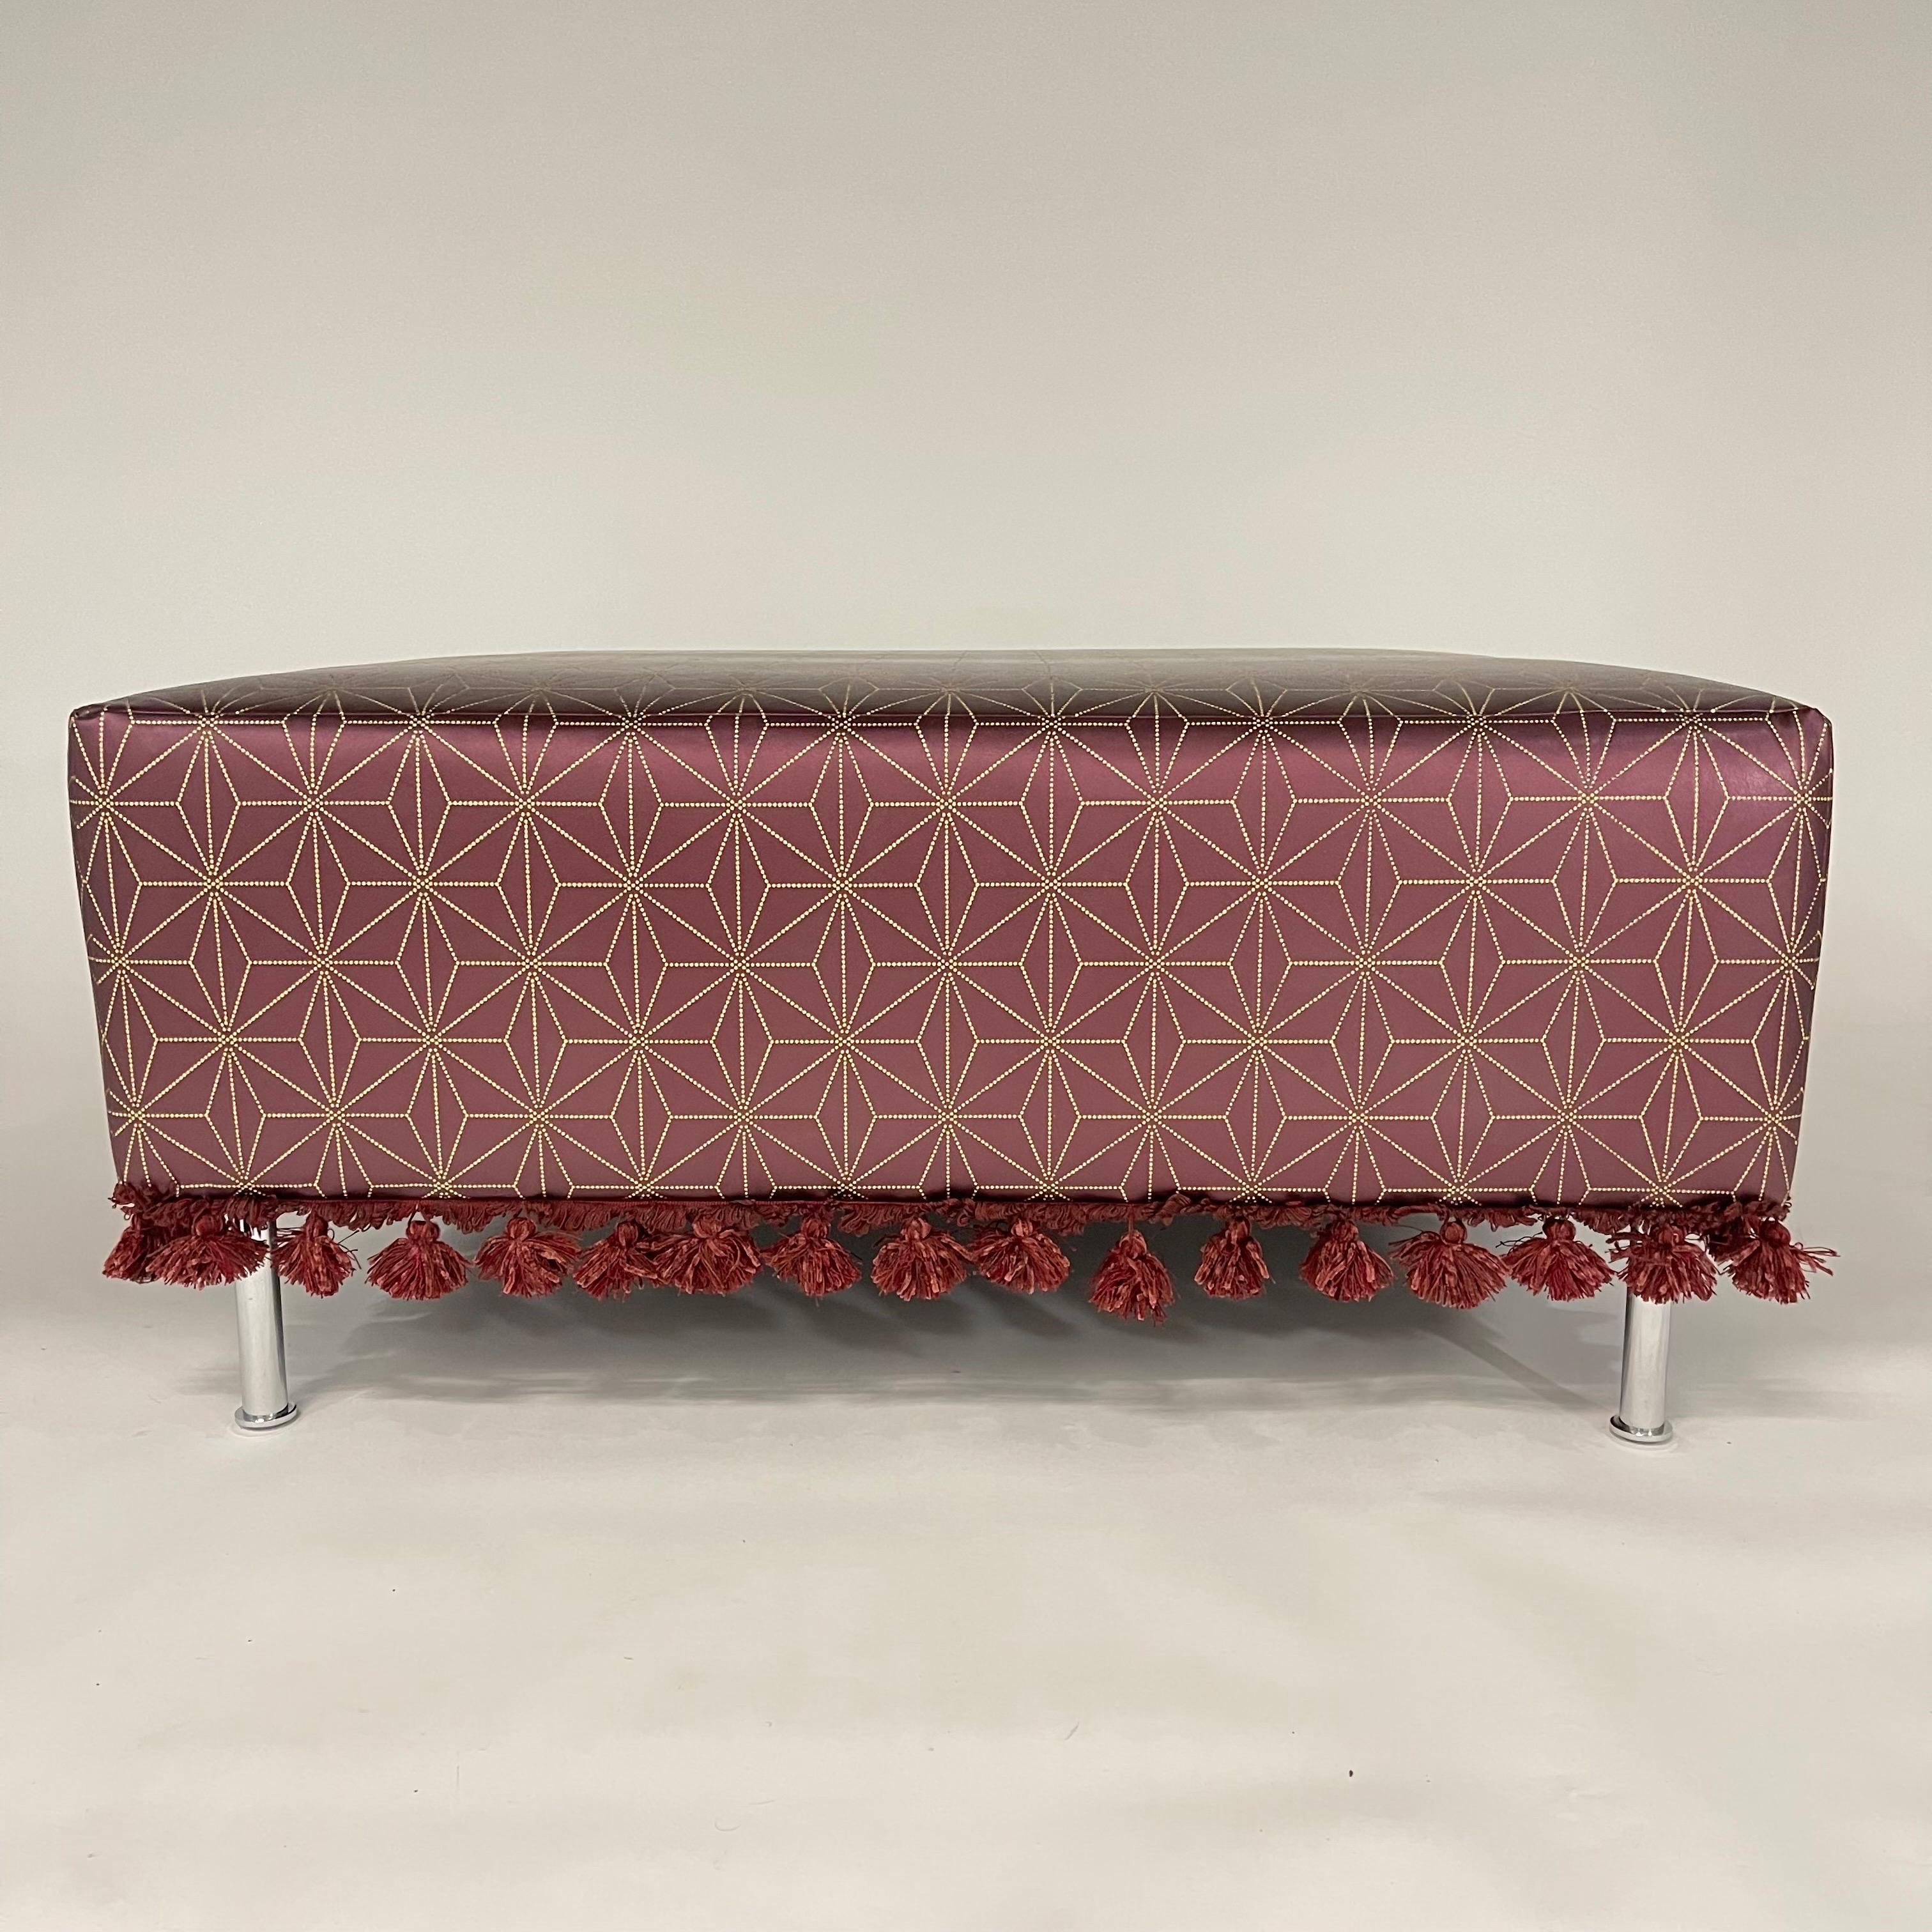 Unique Modern Moroccan Ottoman or Foot Stool, rendered in Burgundy Wine colored leather embossed with a moroccan print in gold with a tassel trim detail around the base of 4 polished stainless steel legs.  USA